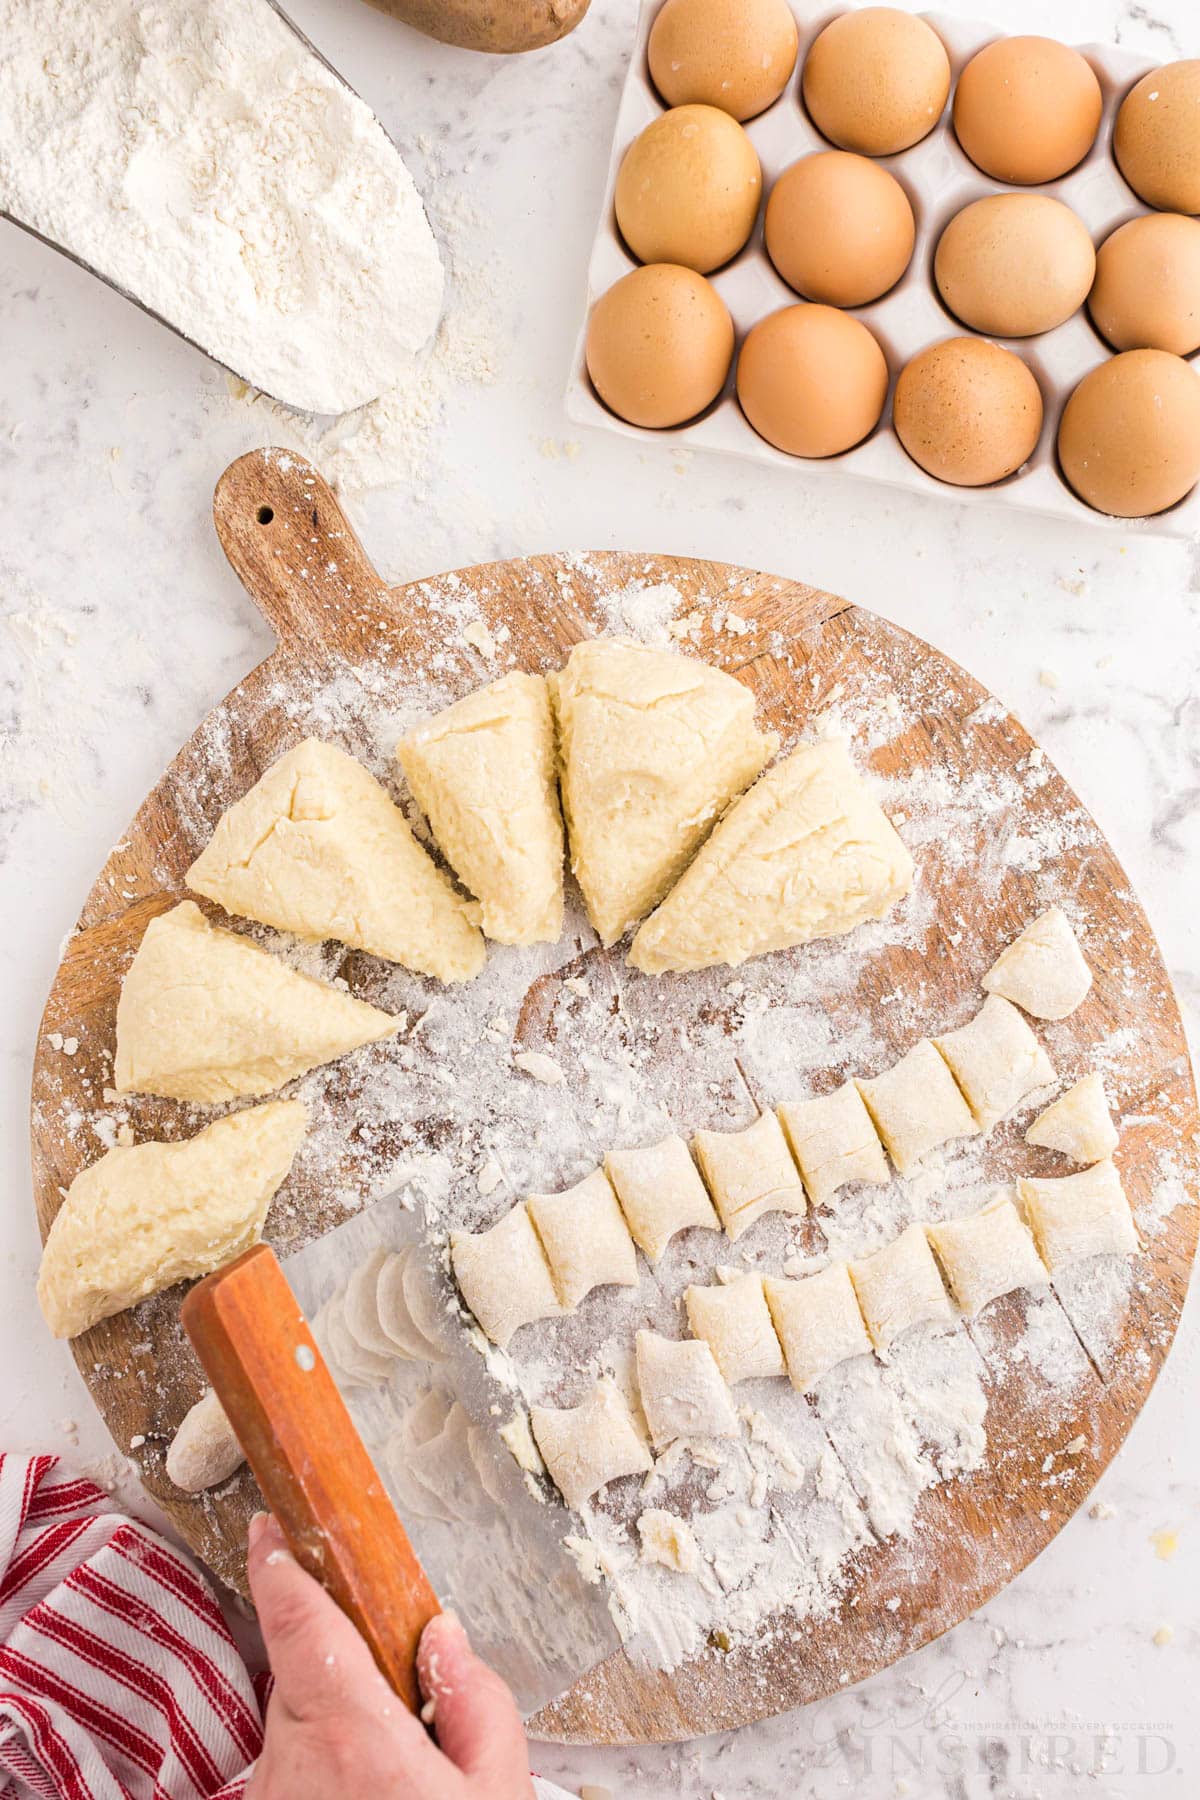 Wooden kitchen board with cut pieces of gnocchi dough, two rolls of gnocchi dough cut into equal pieces, red and white striped linen, tray of eggs, measuring spoon with flour, on a marble countertop.